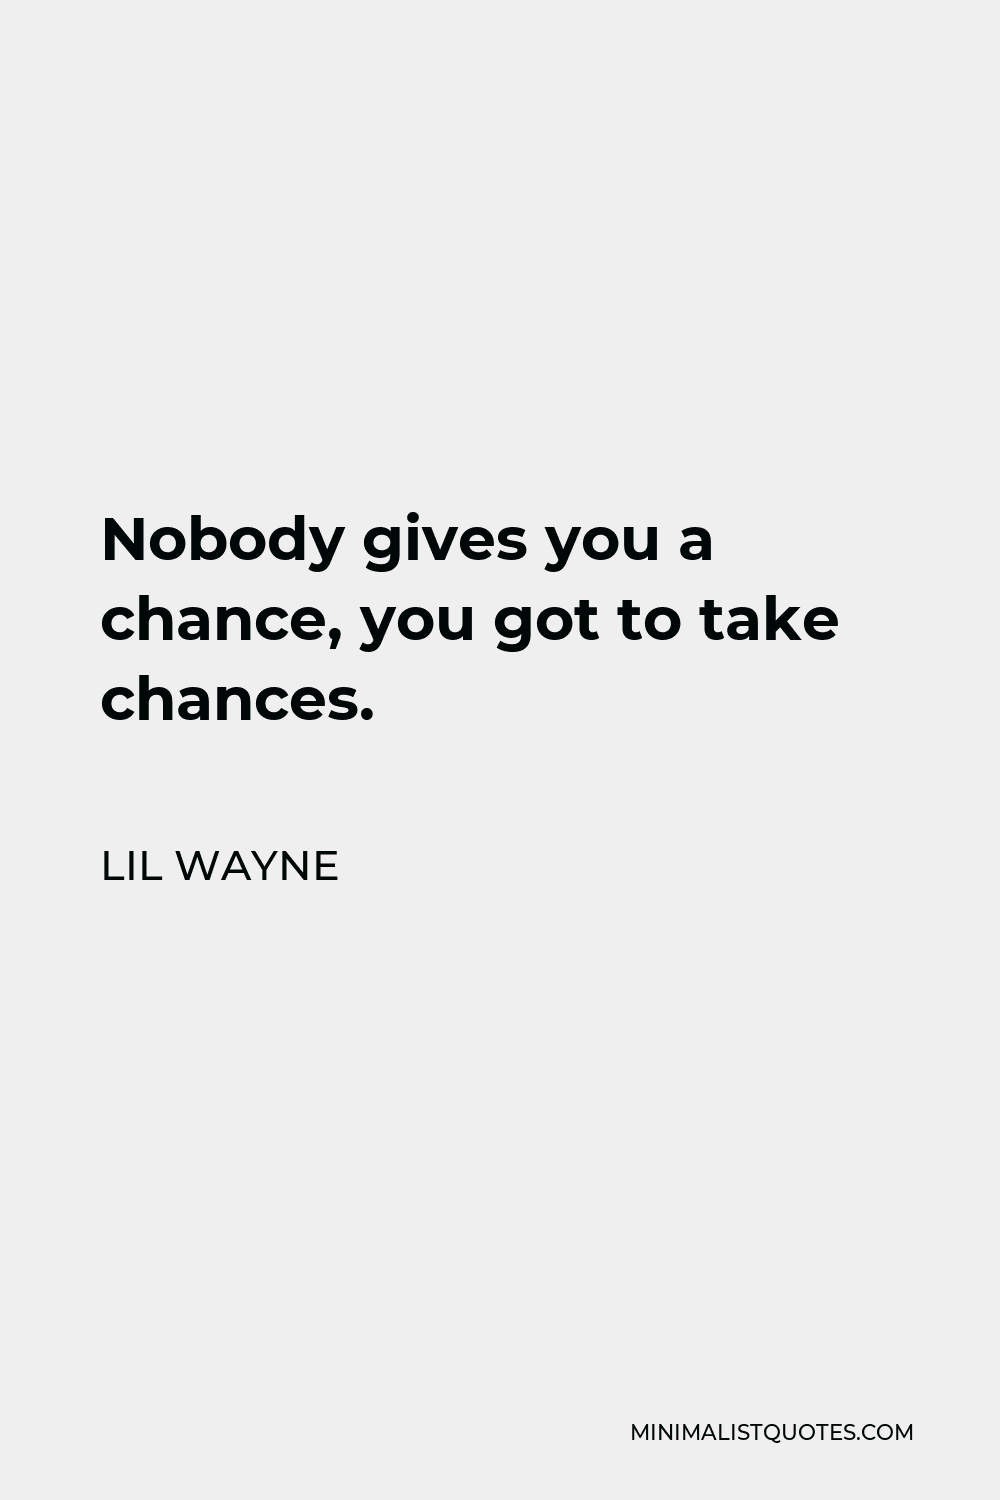 Lil Wayne Quote - Nobody gives you a chance, you got to take chances.